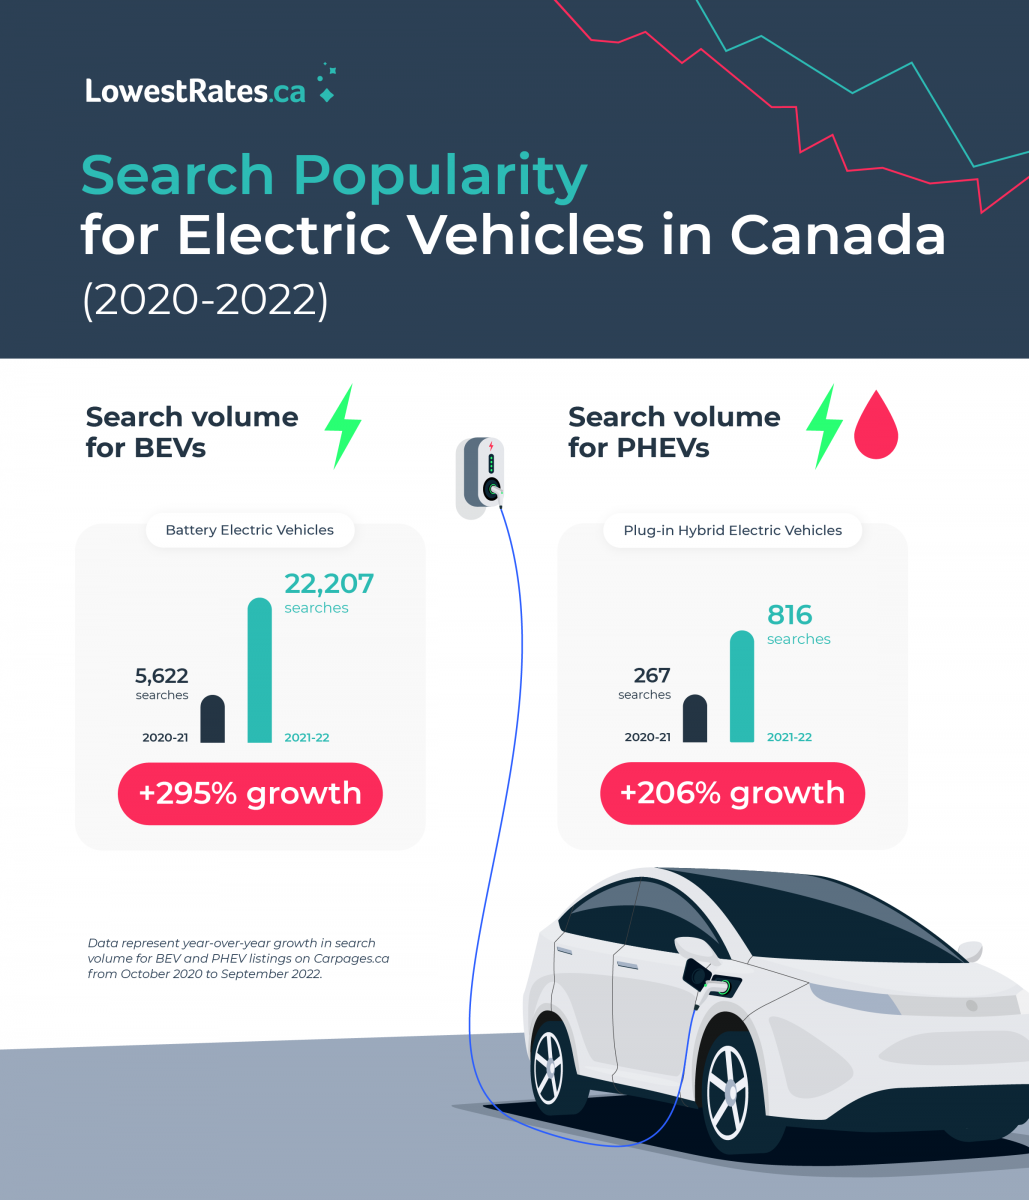 An infographic showing the rise in searches for electric vehicles on Carpages.ca from 2020 to 2022.